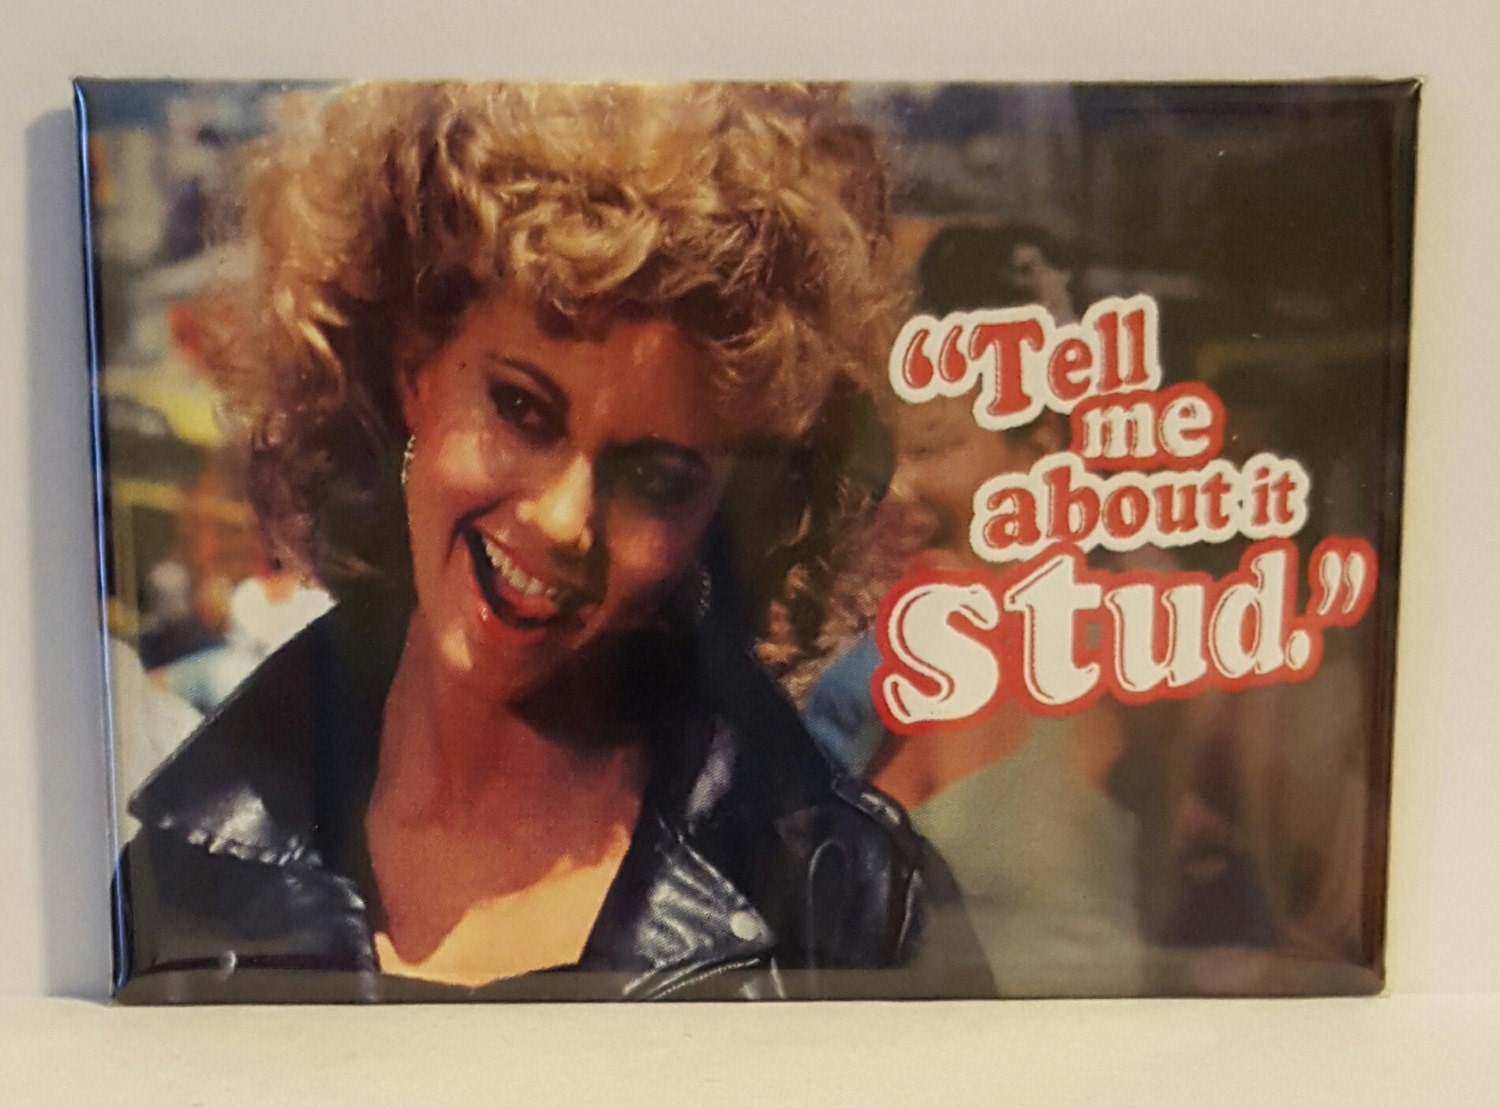 Sandy Tell me about it stud Grease Movie 2 x | Etsy